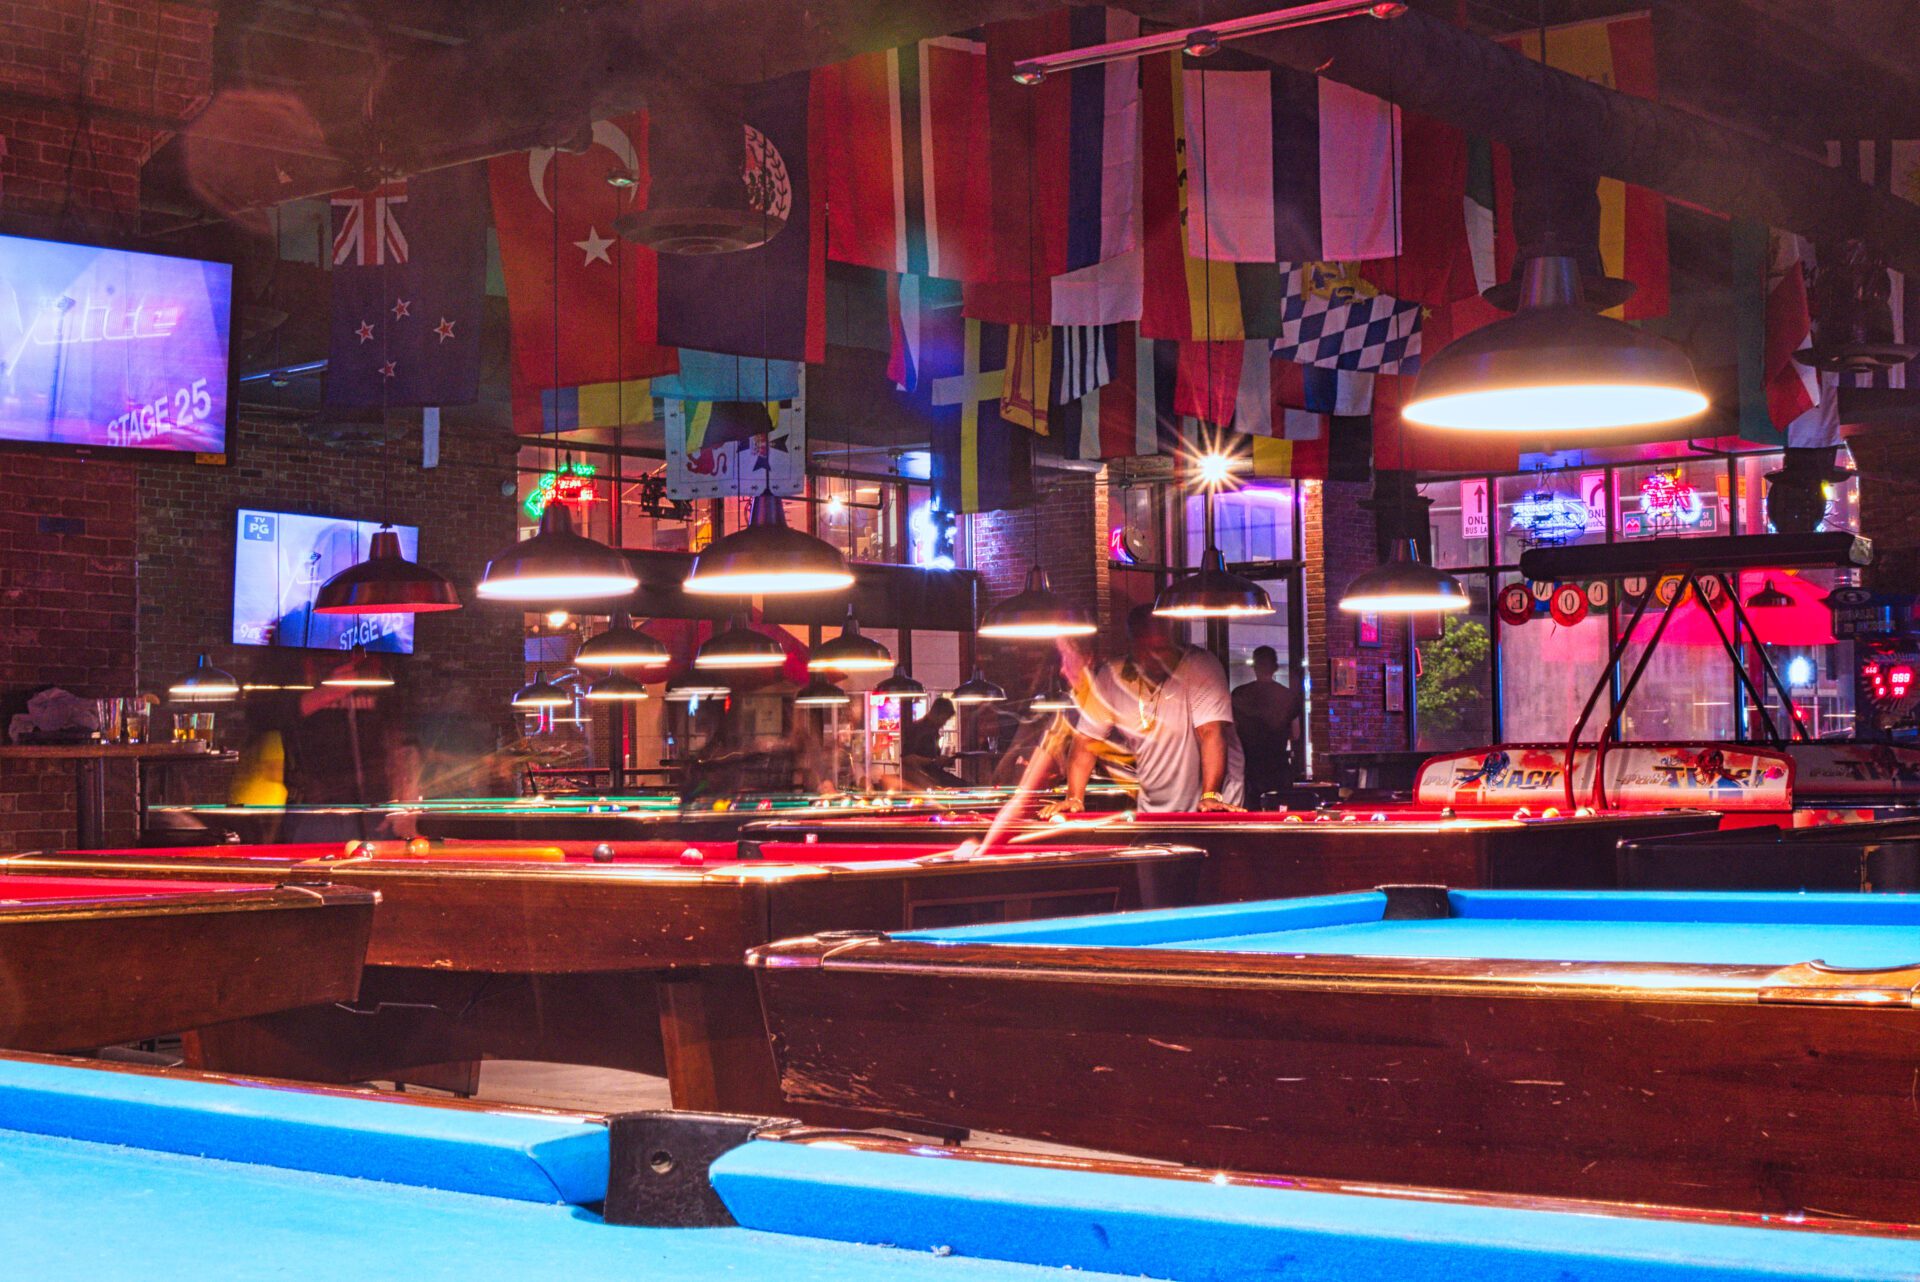 closeup of billiard tables with people and country flags